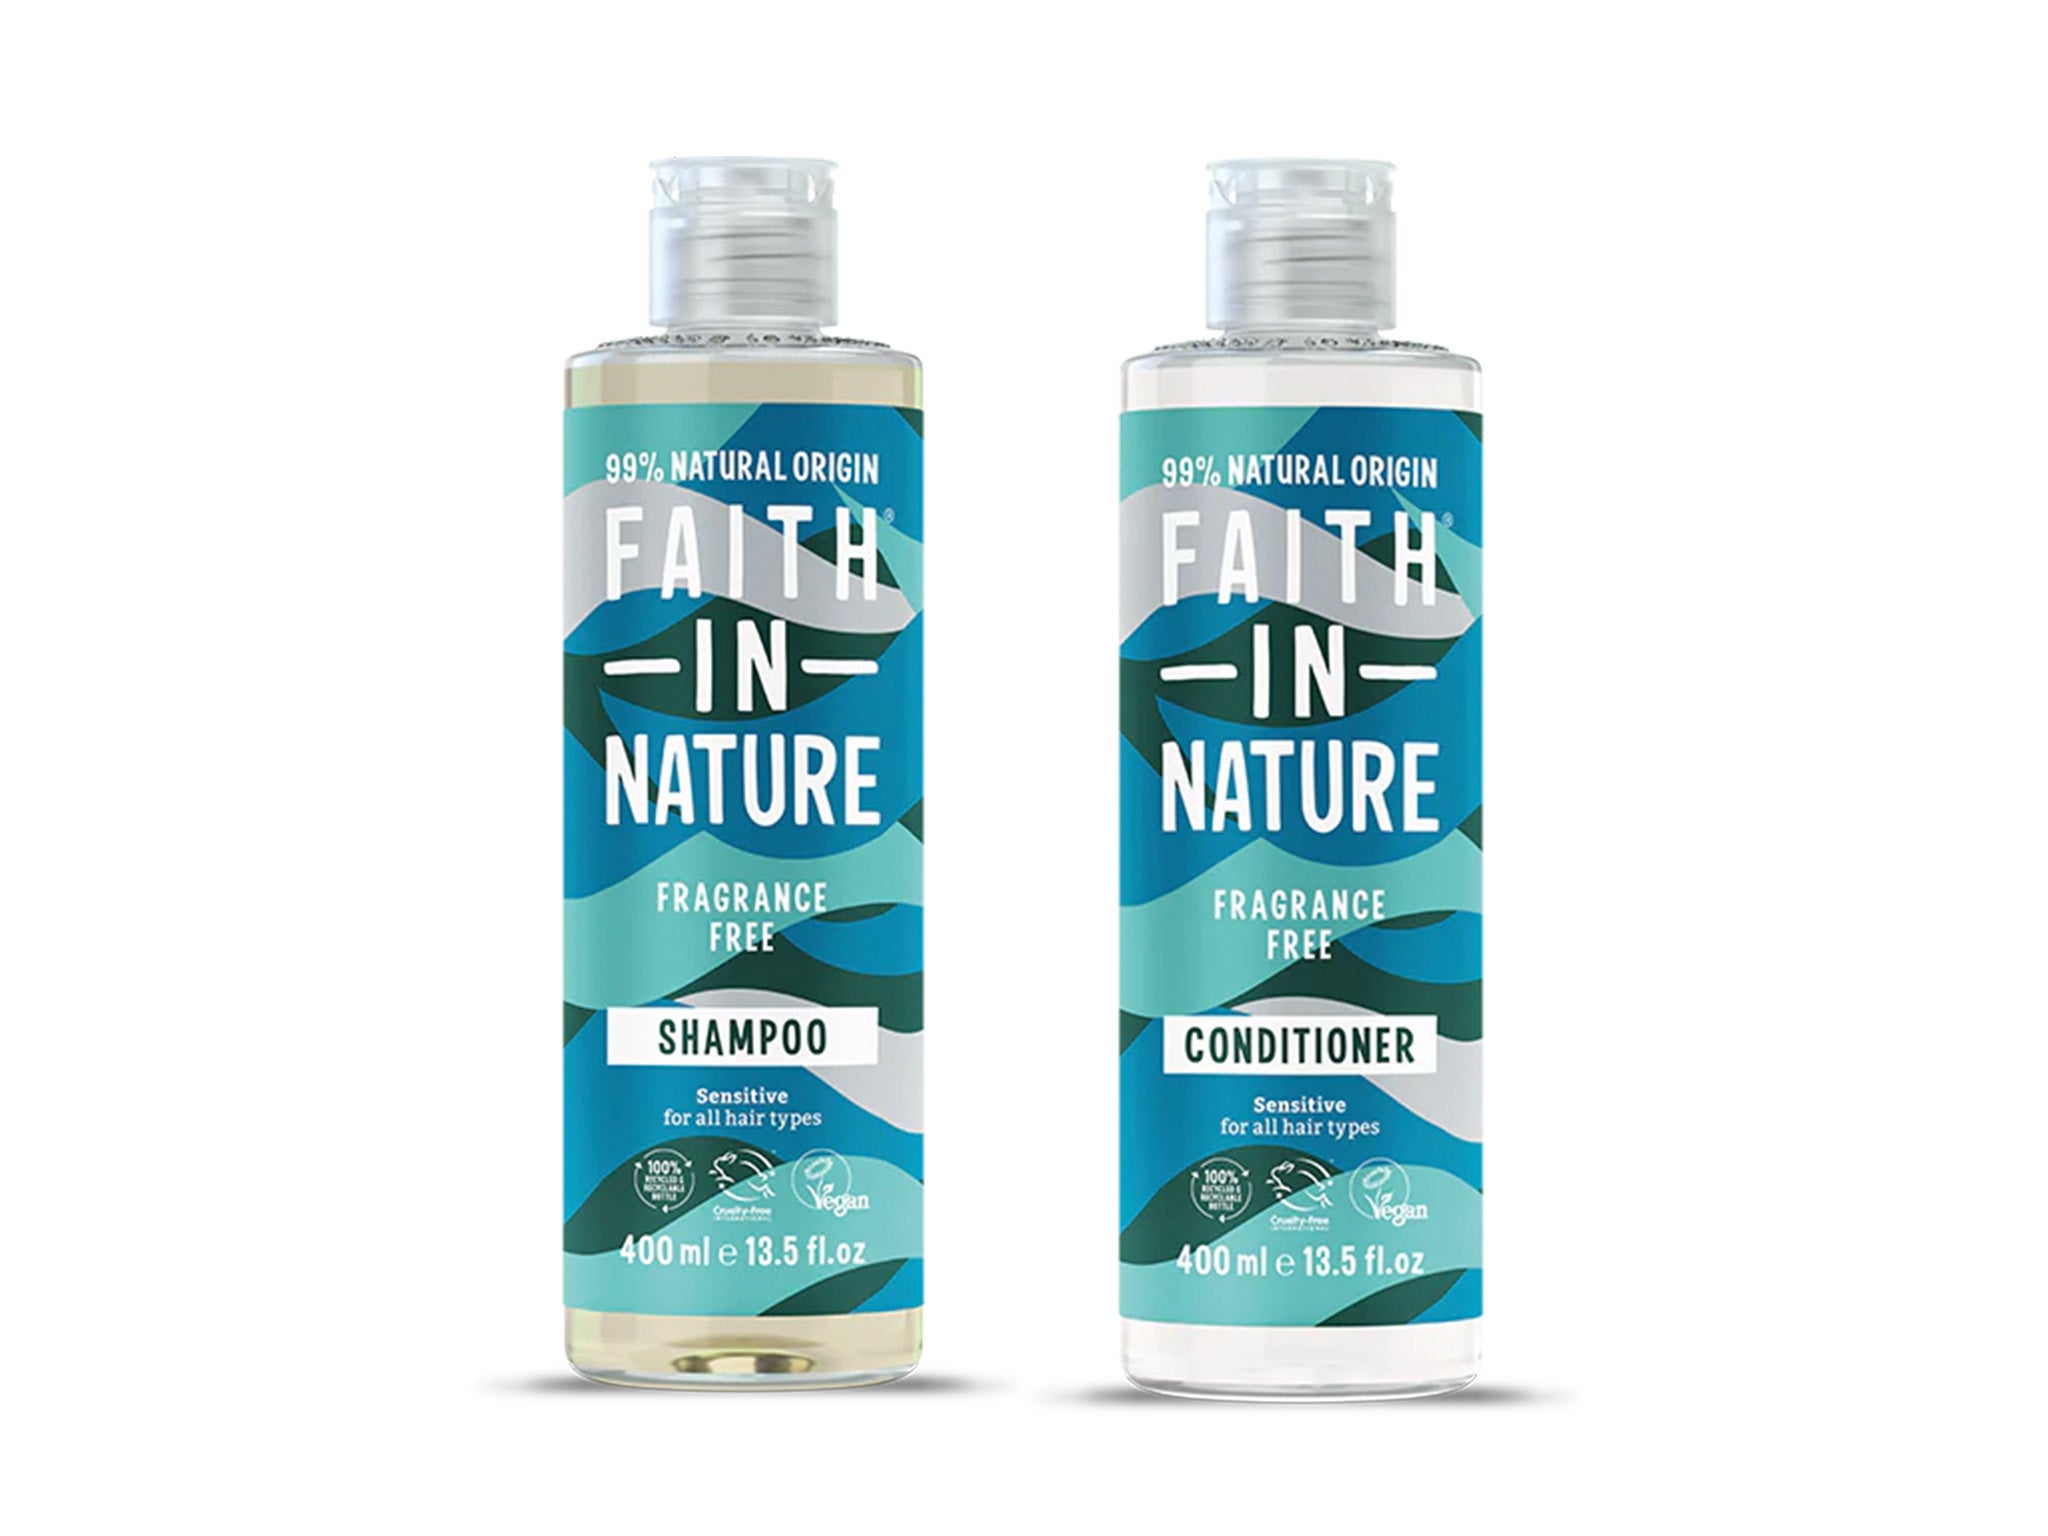 Faith in Nature fragrance free shampoo and conditioner 